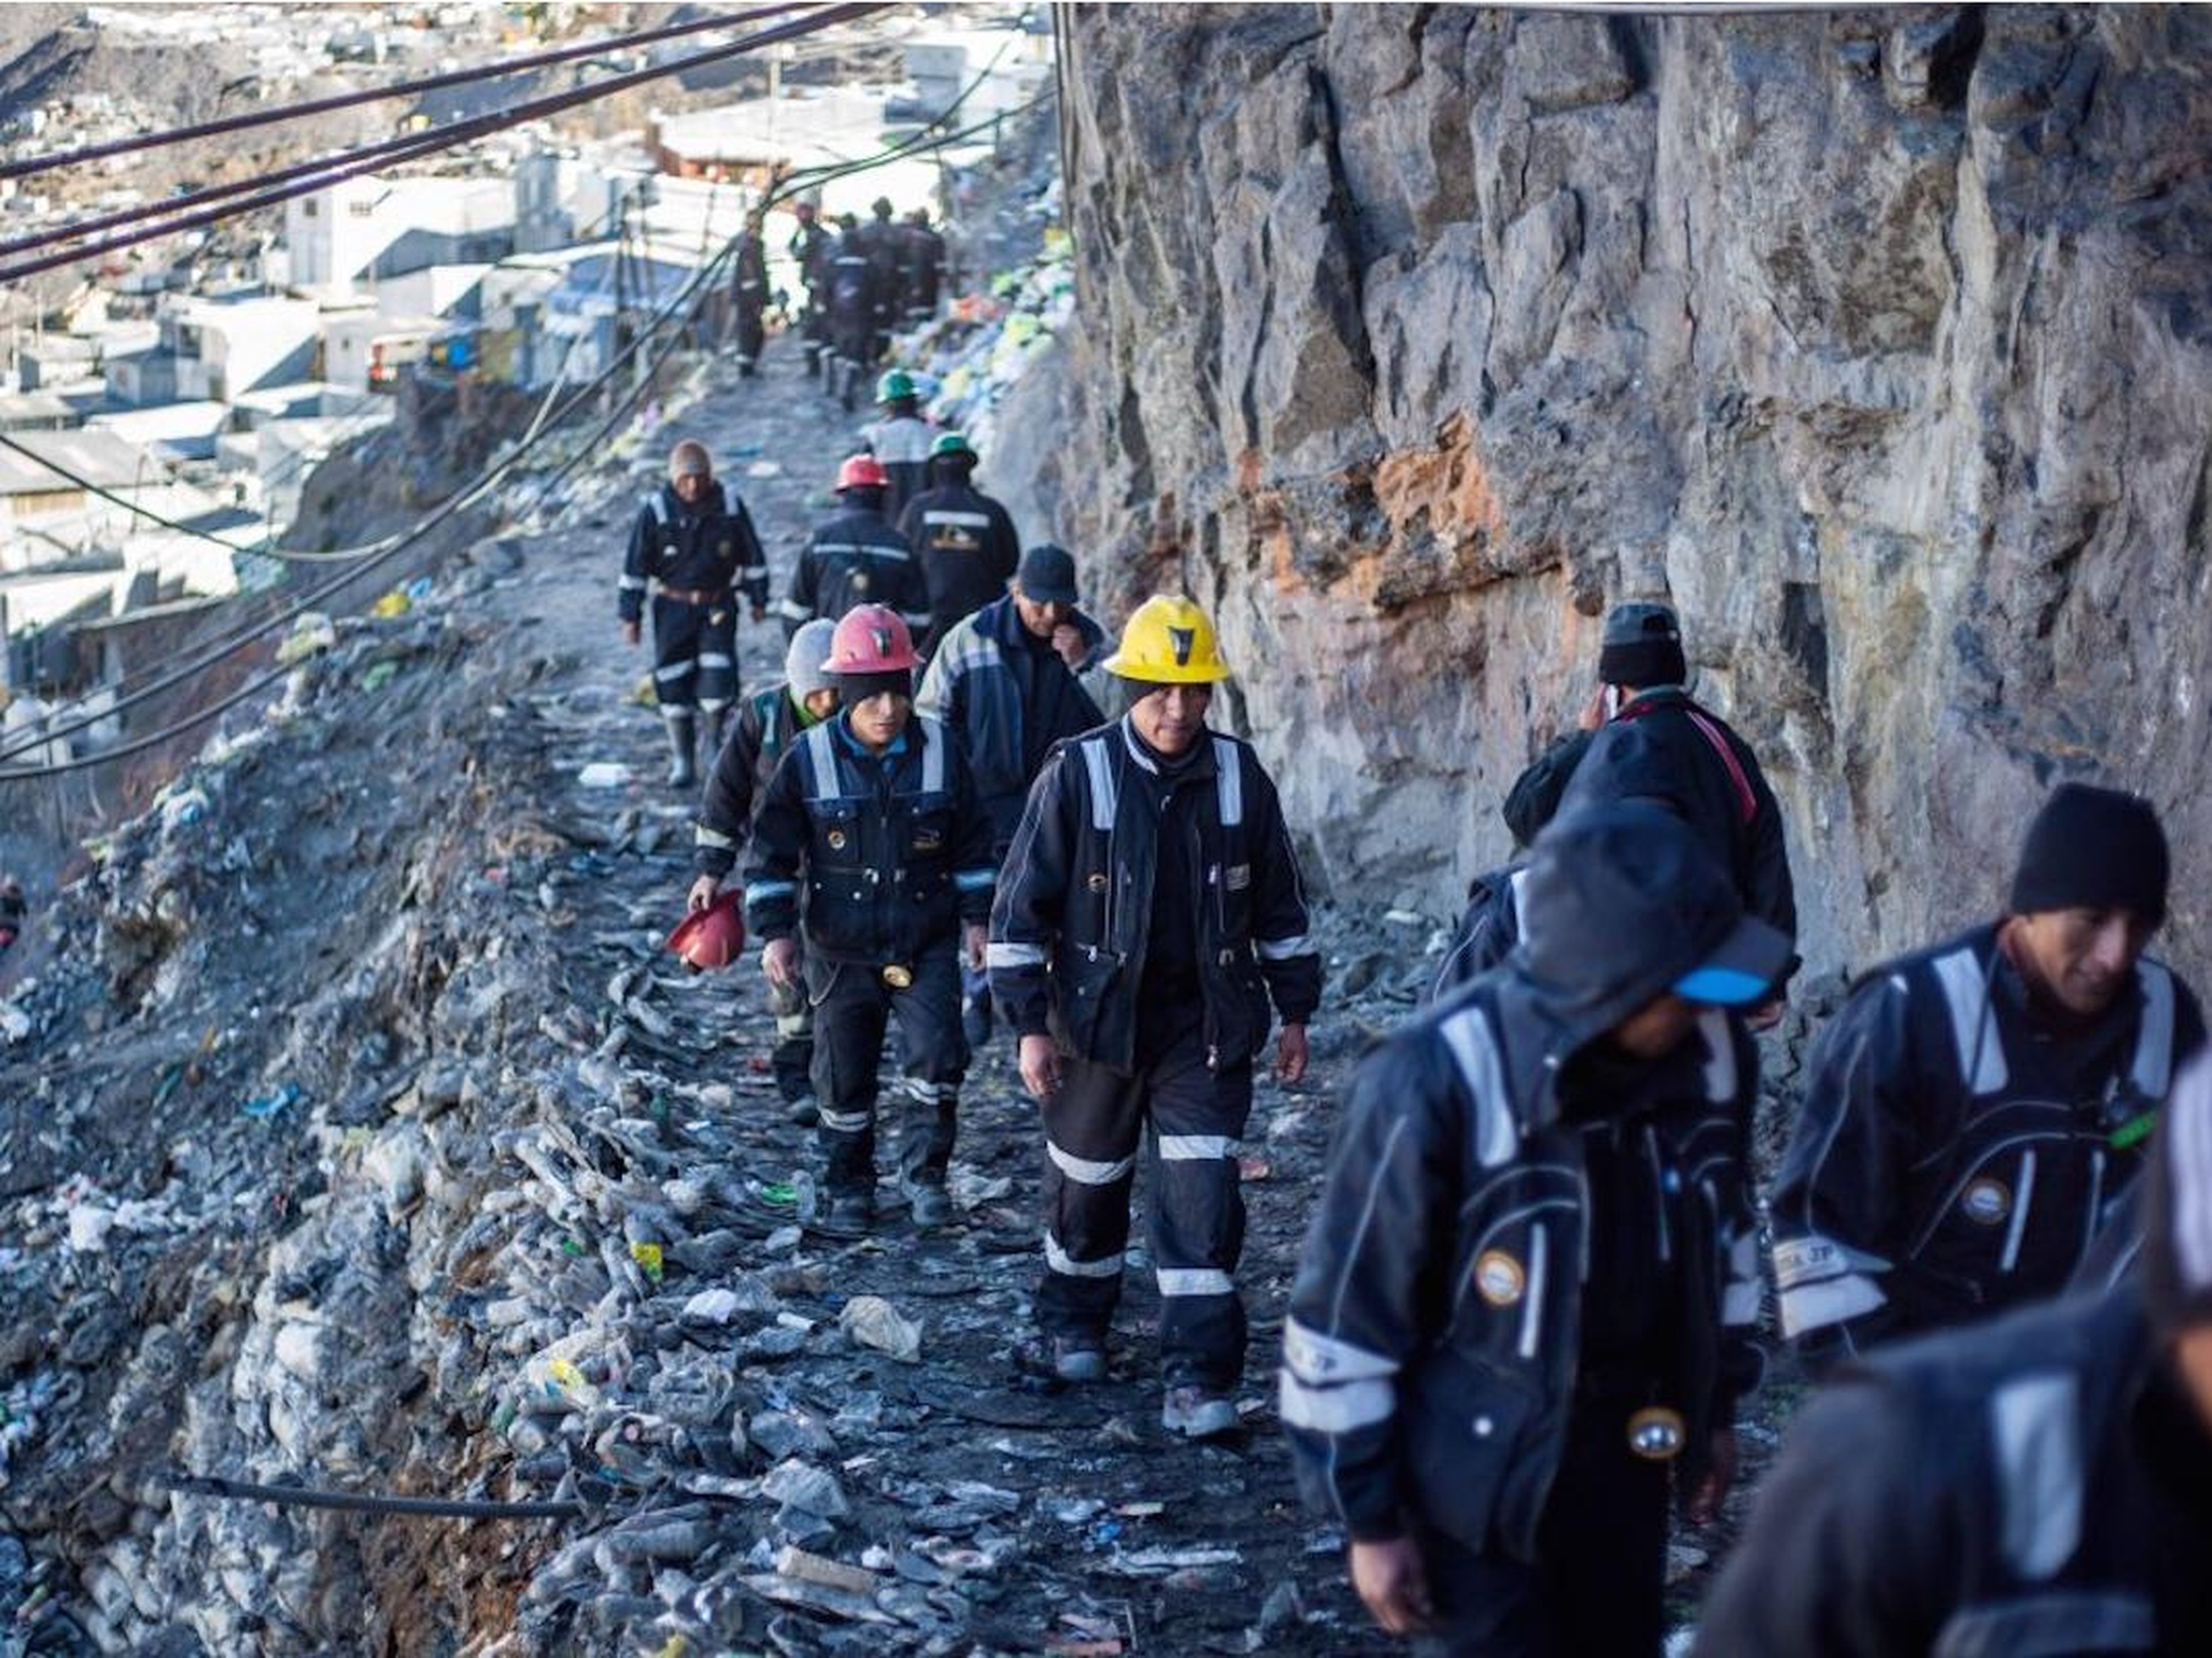 Gold has been mined in the Andes for centuries, with mining activity dating as far back as the Incas. People in La Rinconada hike for 30 minutes every day to reach the mines, which are filled with hazardous gasses, mercury,